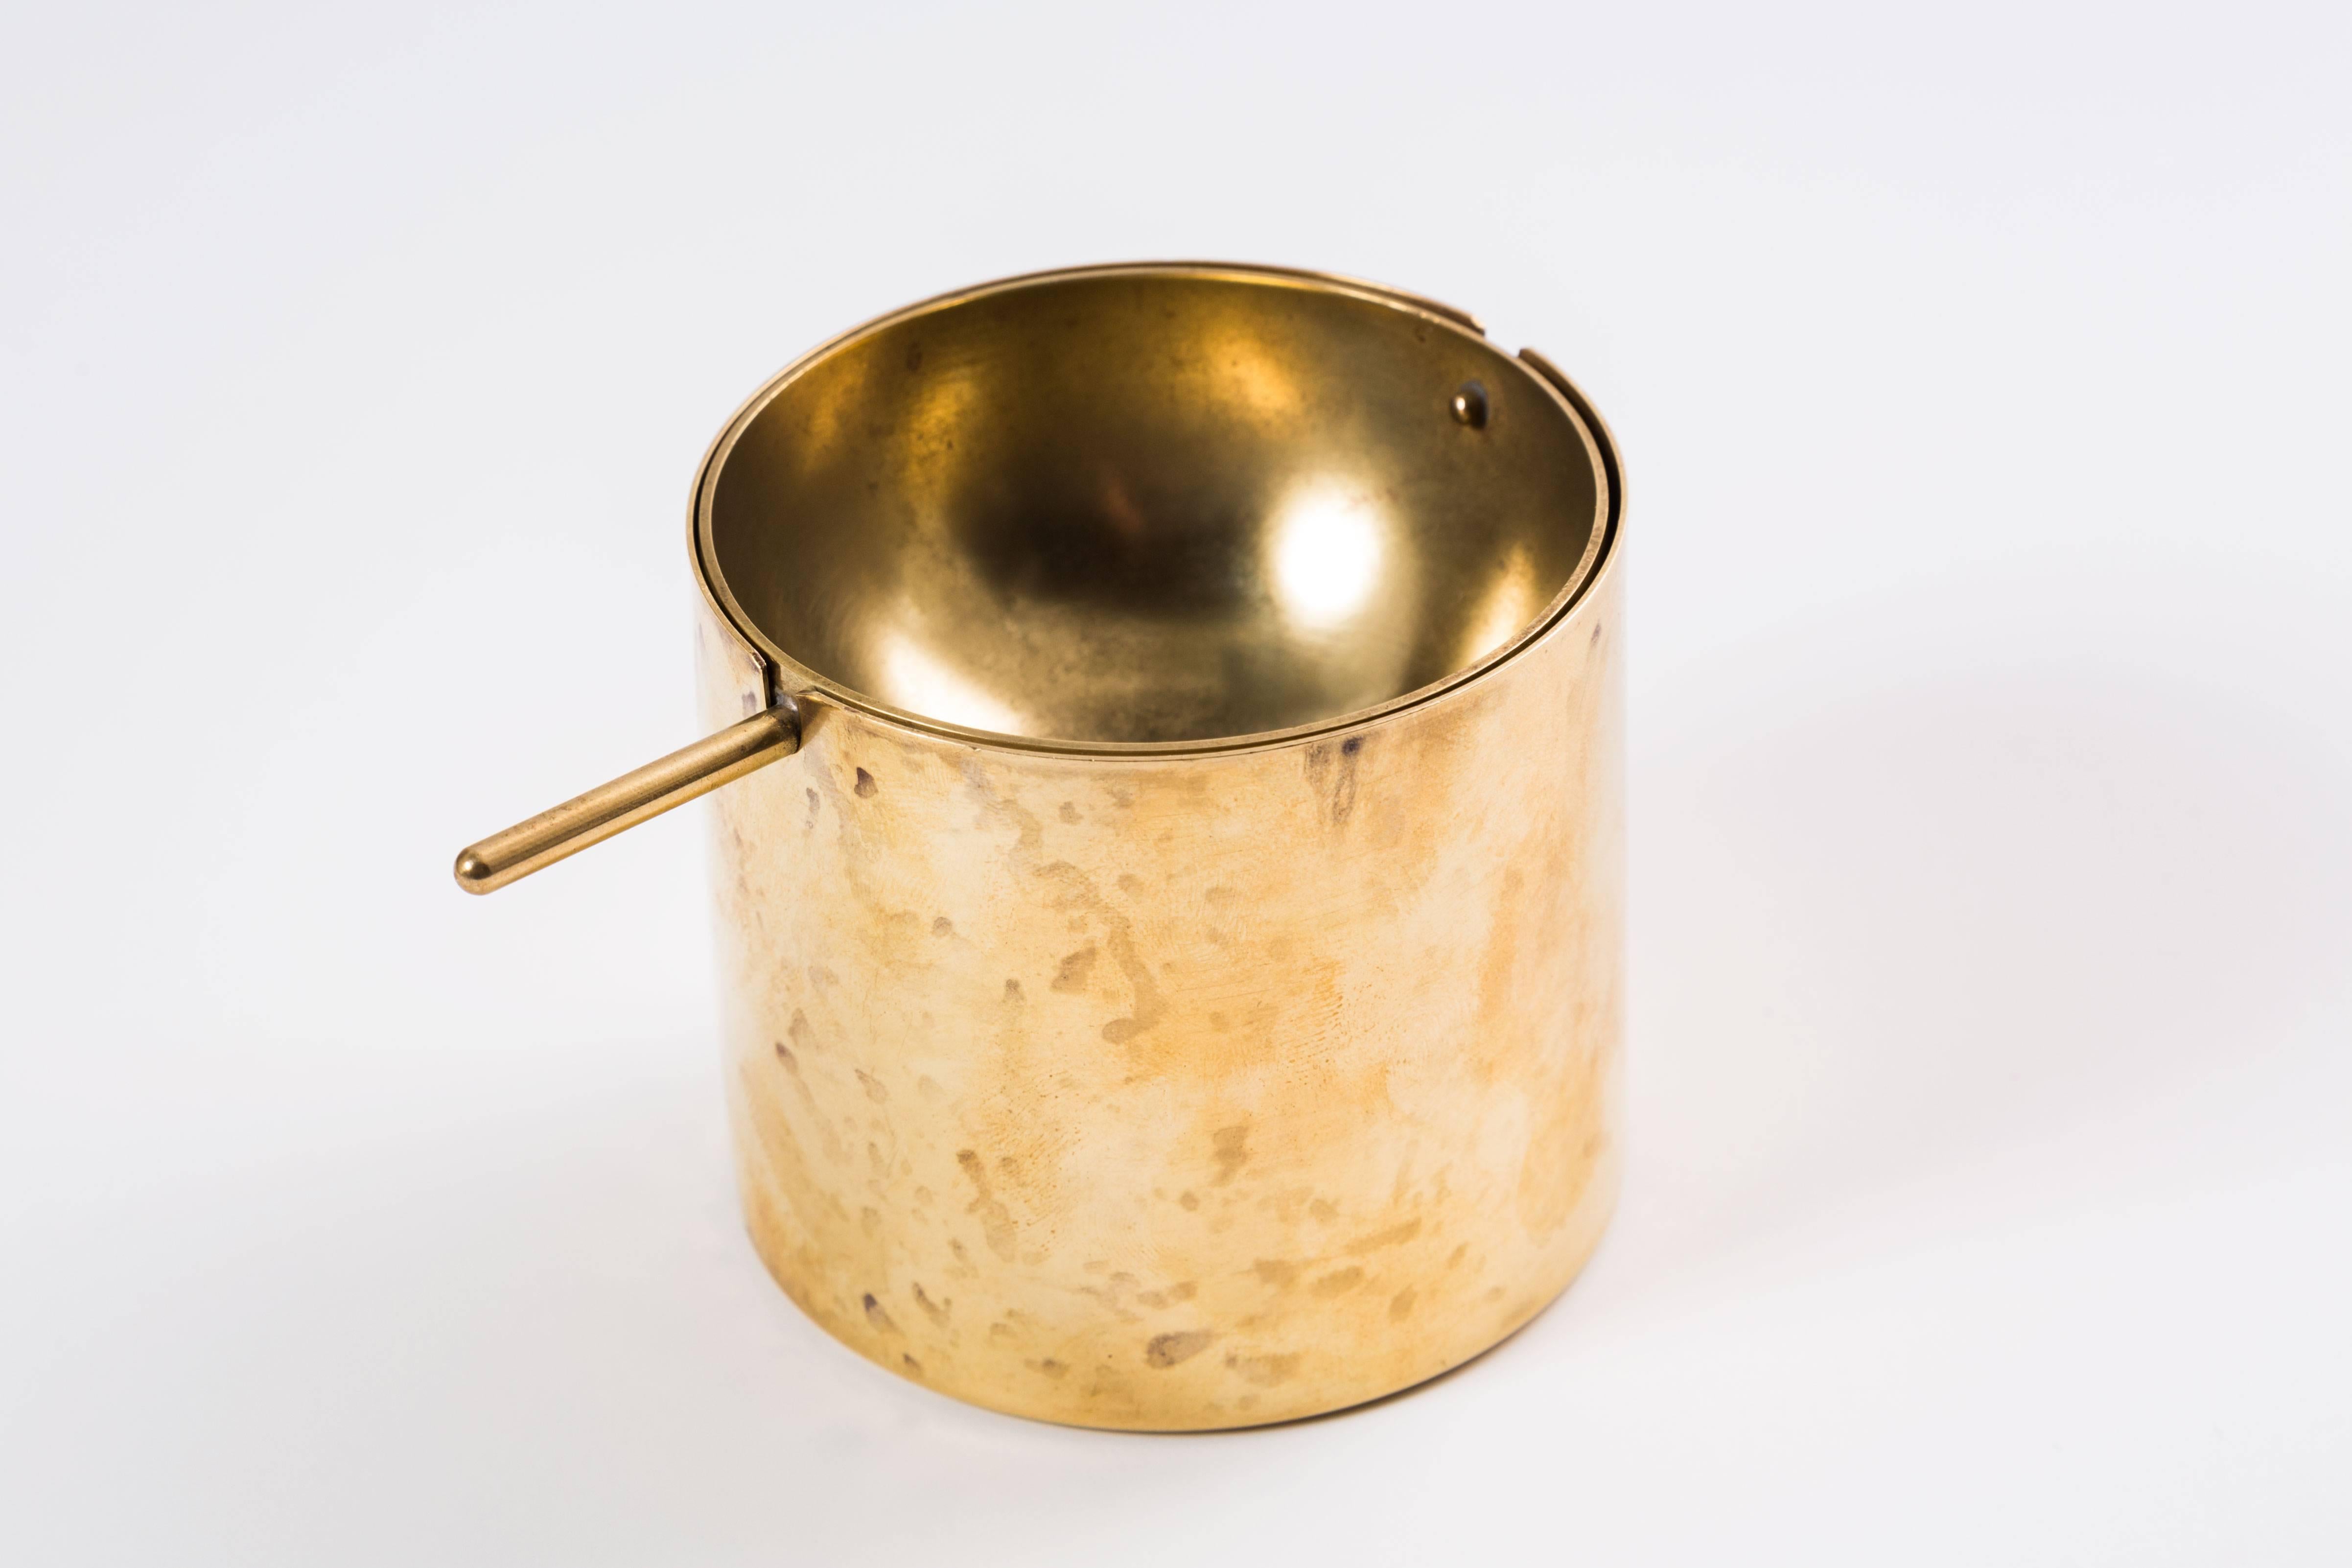 Revolving brass Cylinda-Line ashtray by Arne Jacobsen for Stelton with beautiful patina. Made for SAS Hotel in Denmark, circa 1959.